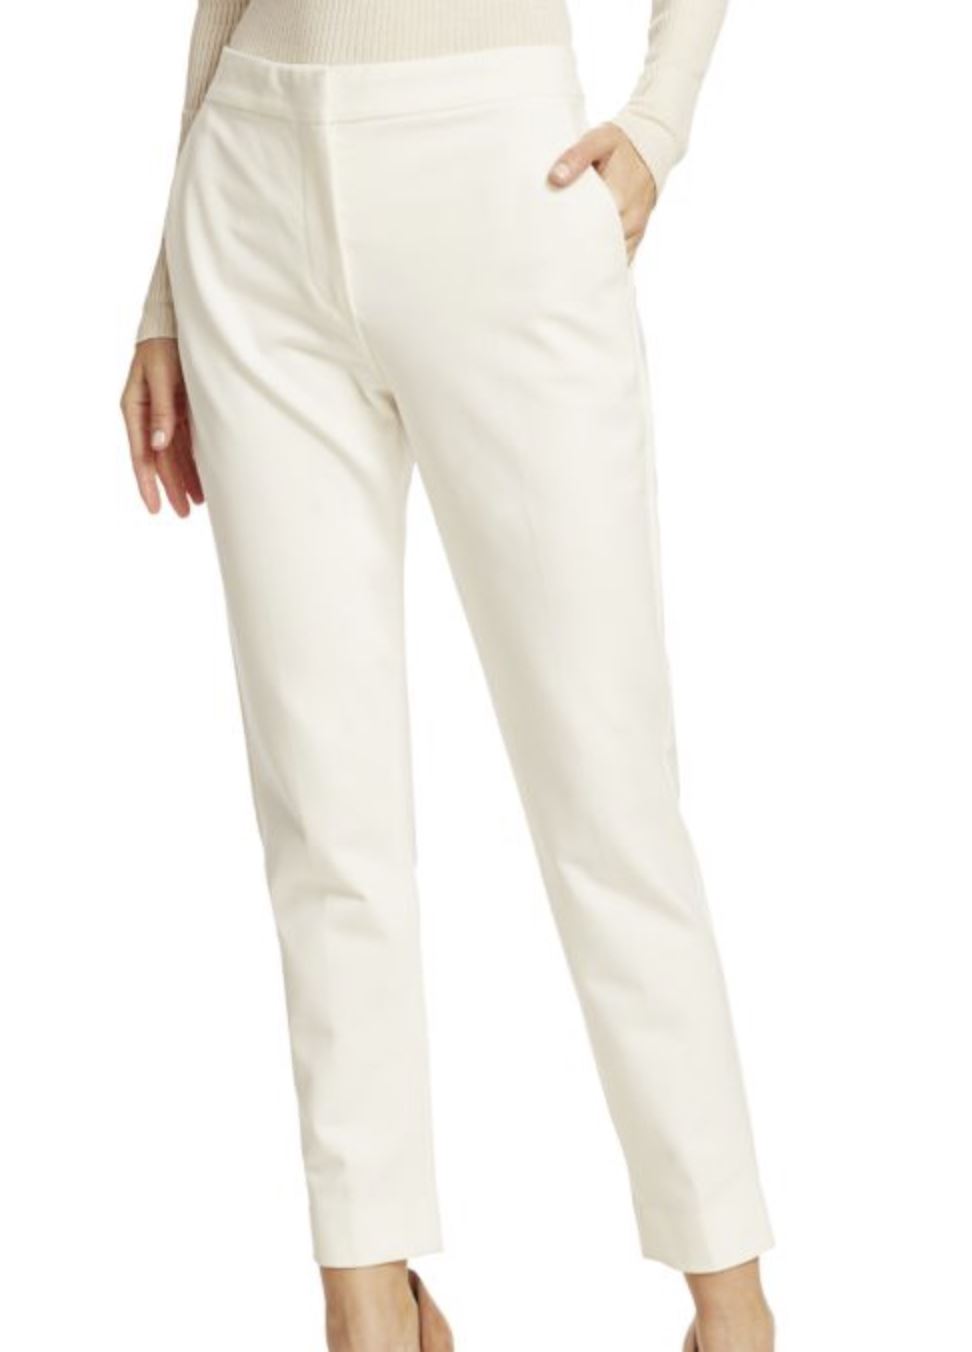 NWT $595 MAX MARA Pegno Jersey Pants size 6 Made in Portugal